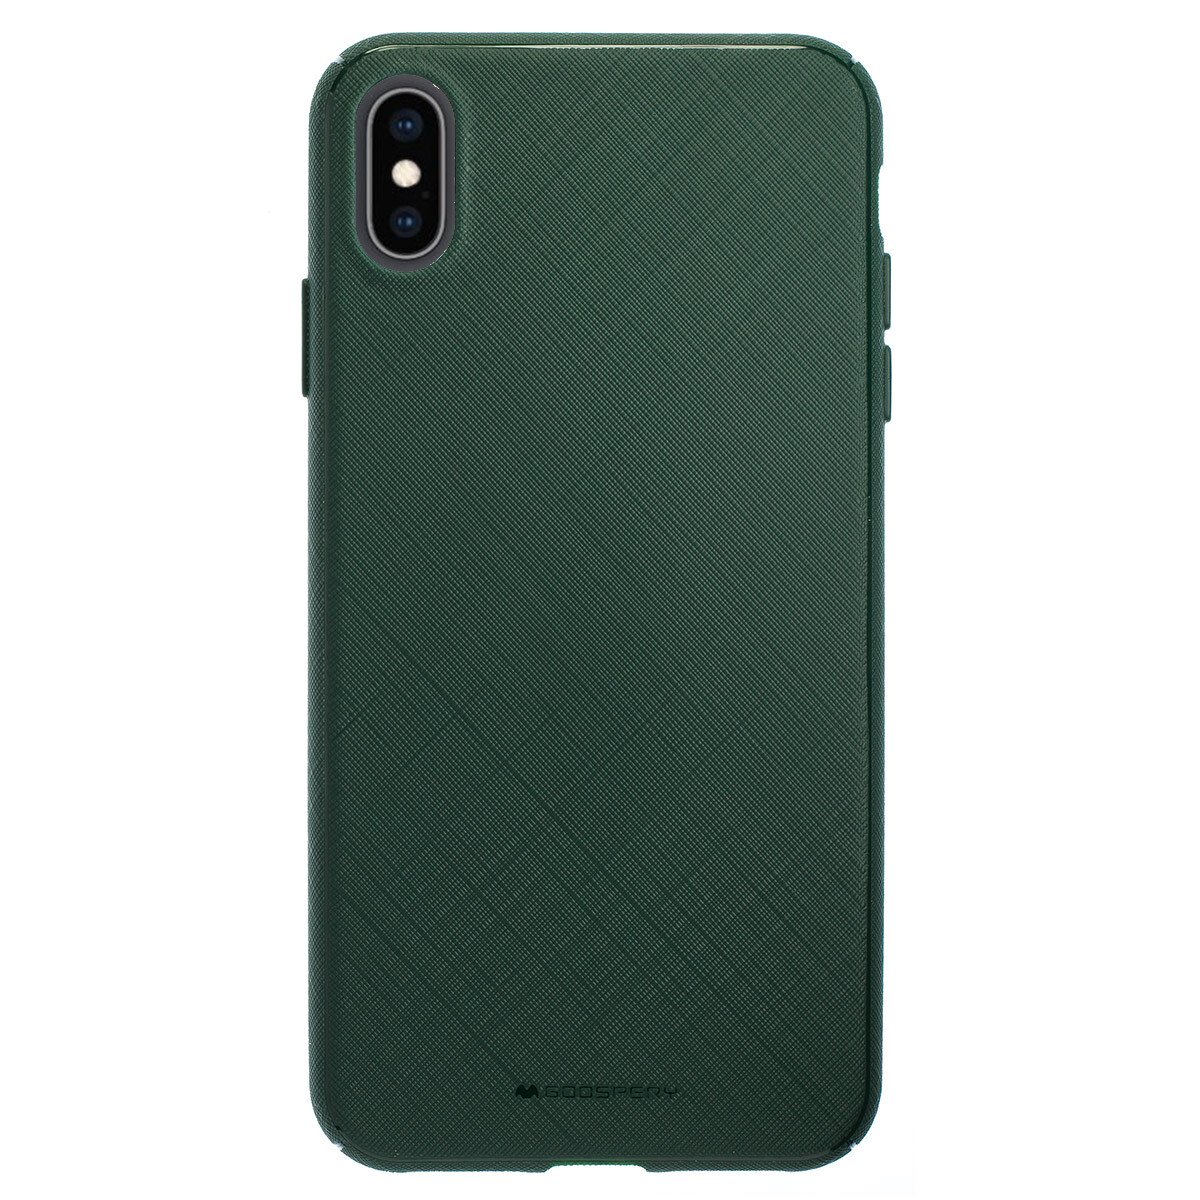 Husa Silicon Iphone XS Max, Stylelux Verde thumb